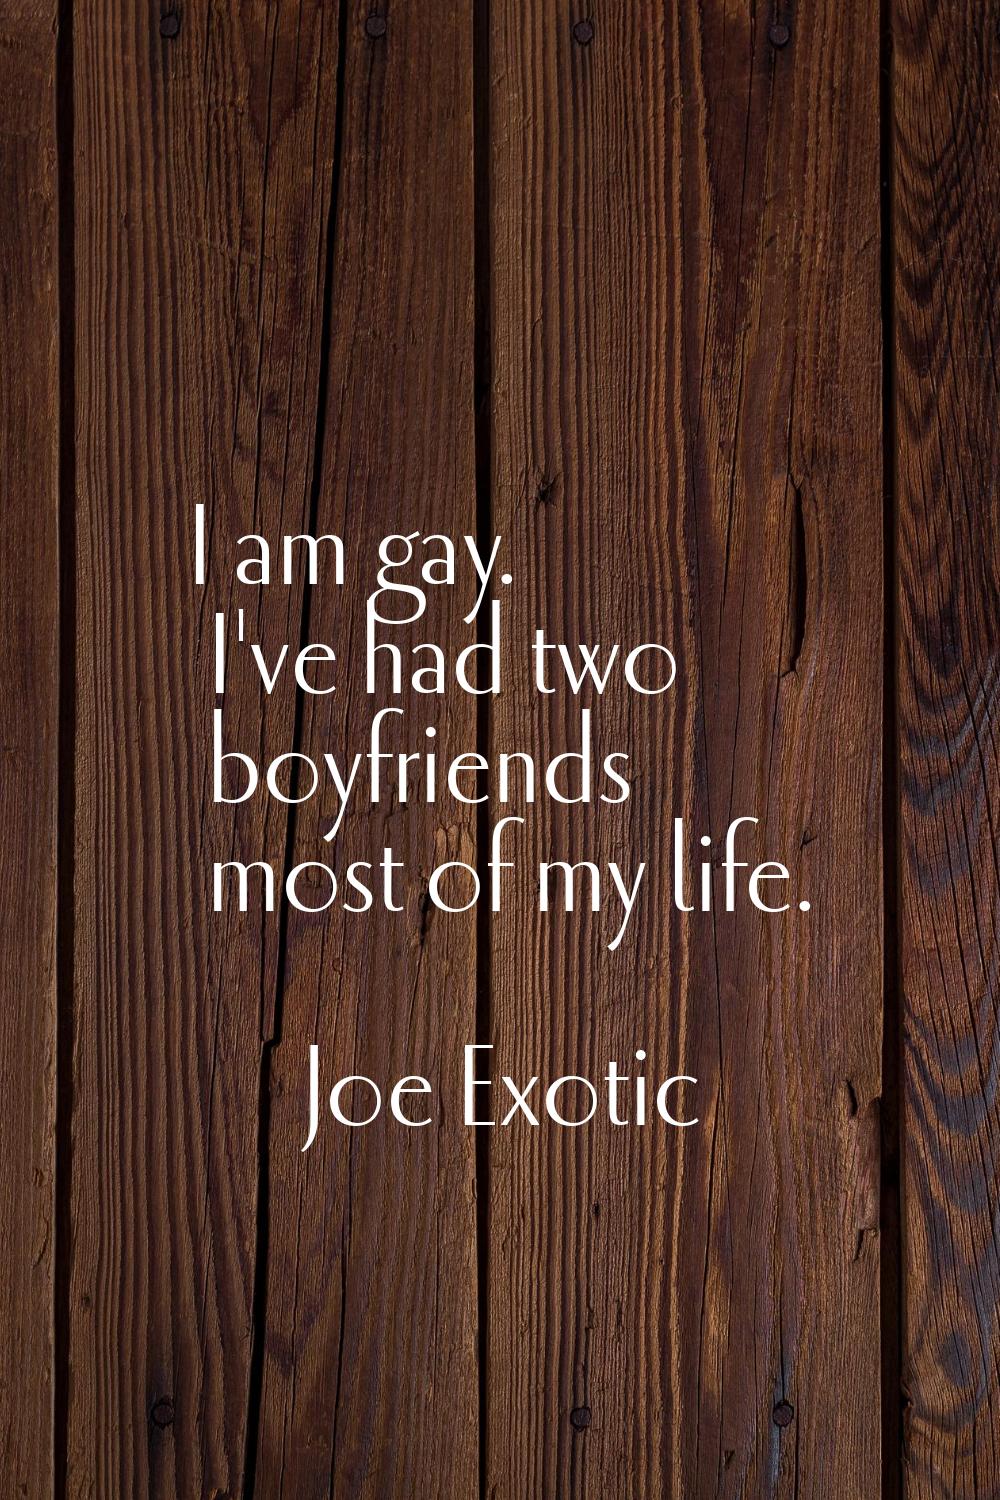 I am gay. I've had two boyfriends most of my life.